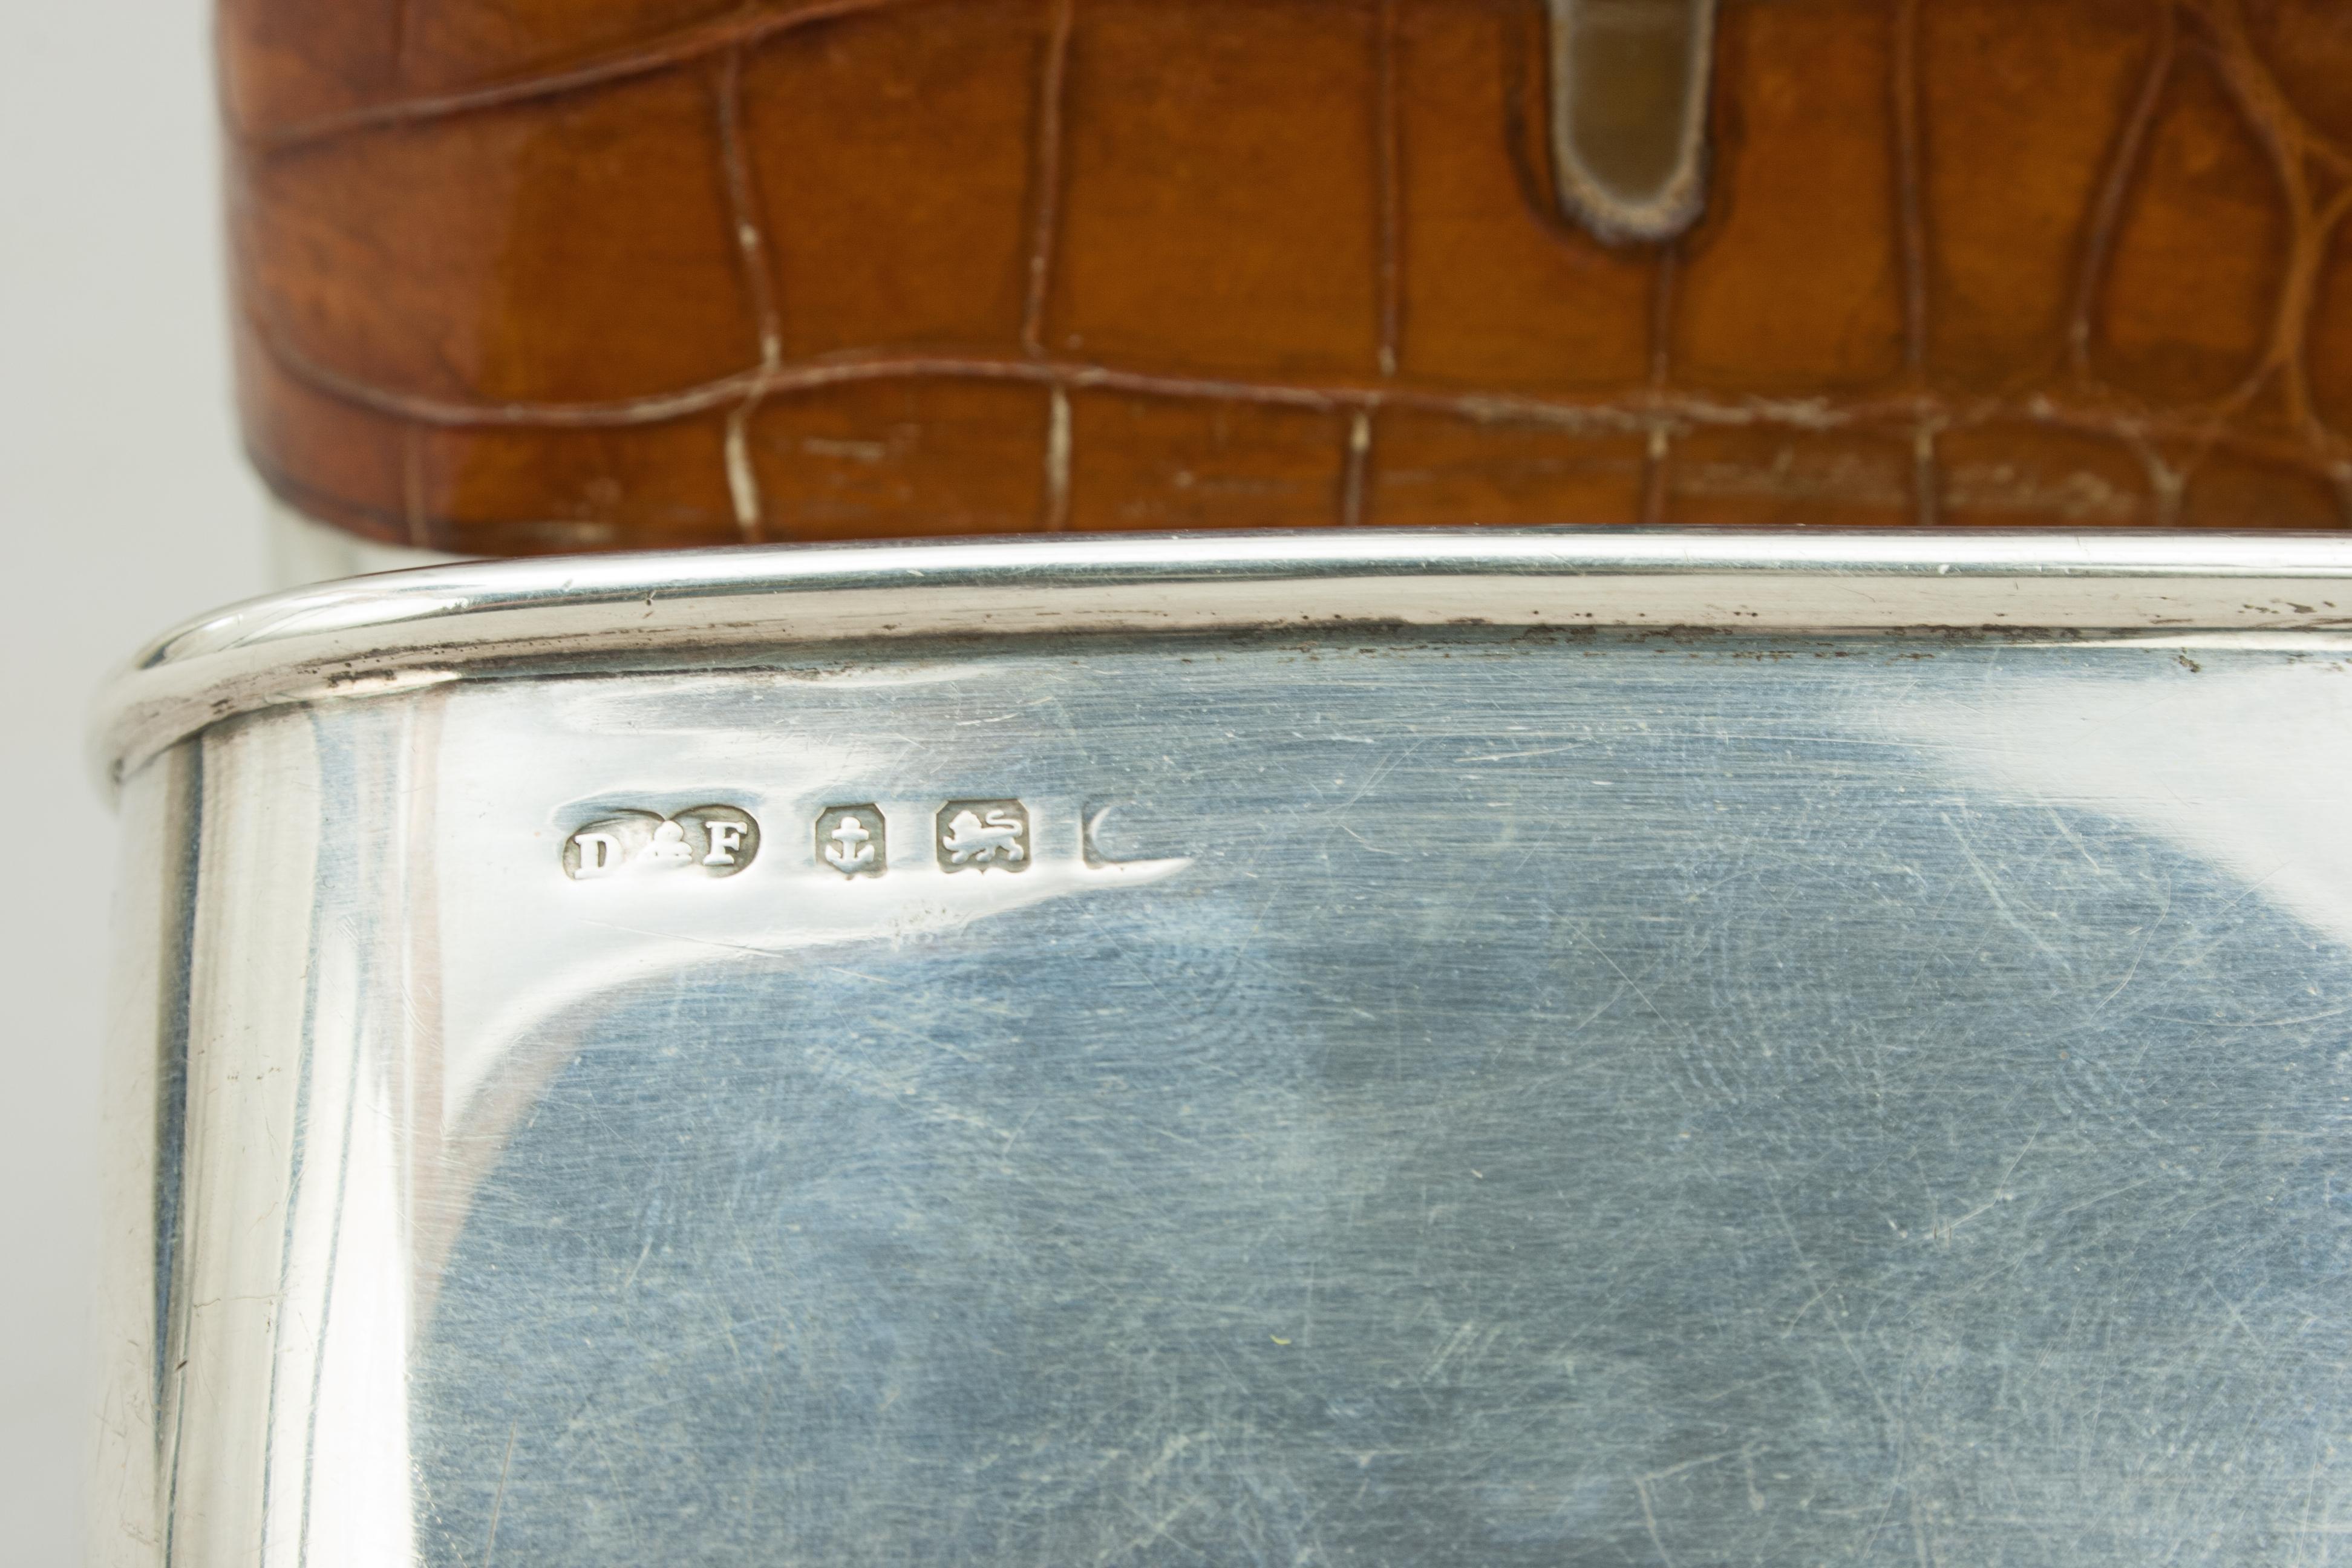 Early 20th Century Vintage Silver Hip Flask with Leather Cover by Deakin & Francis, Birmingham 1926